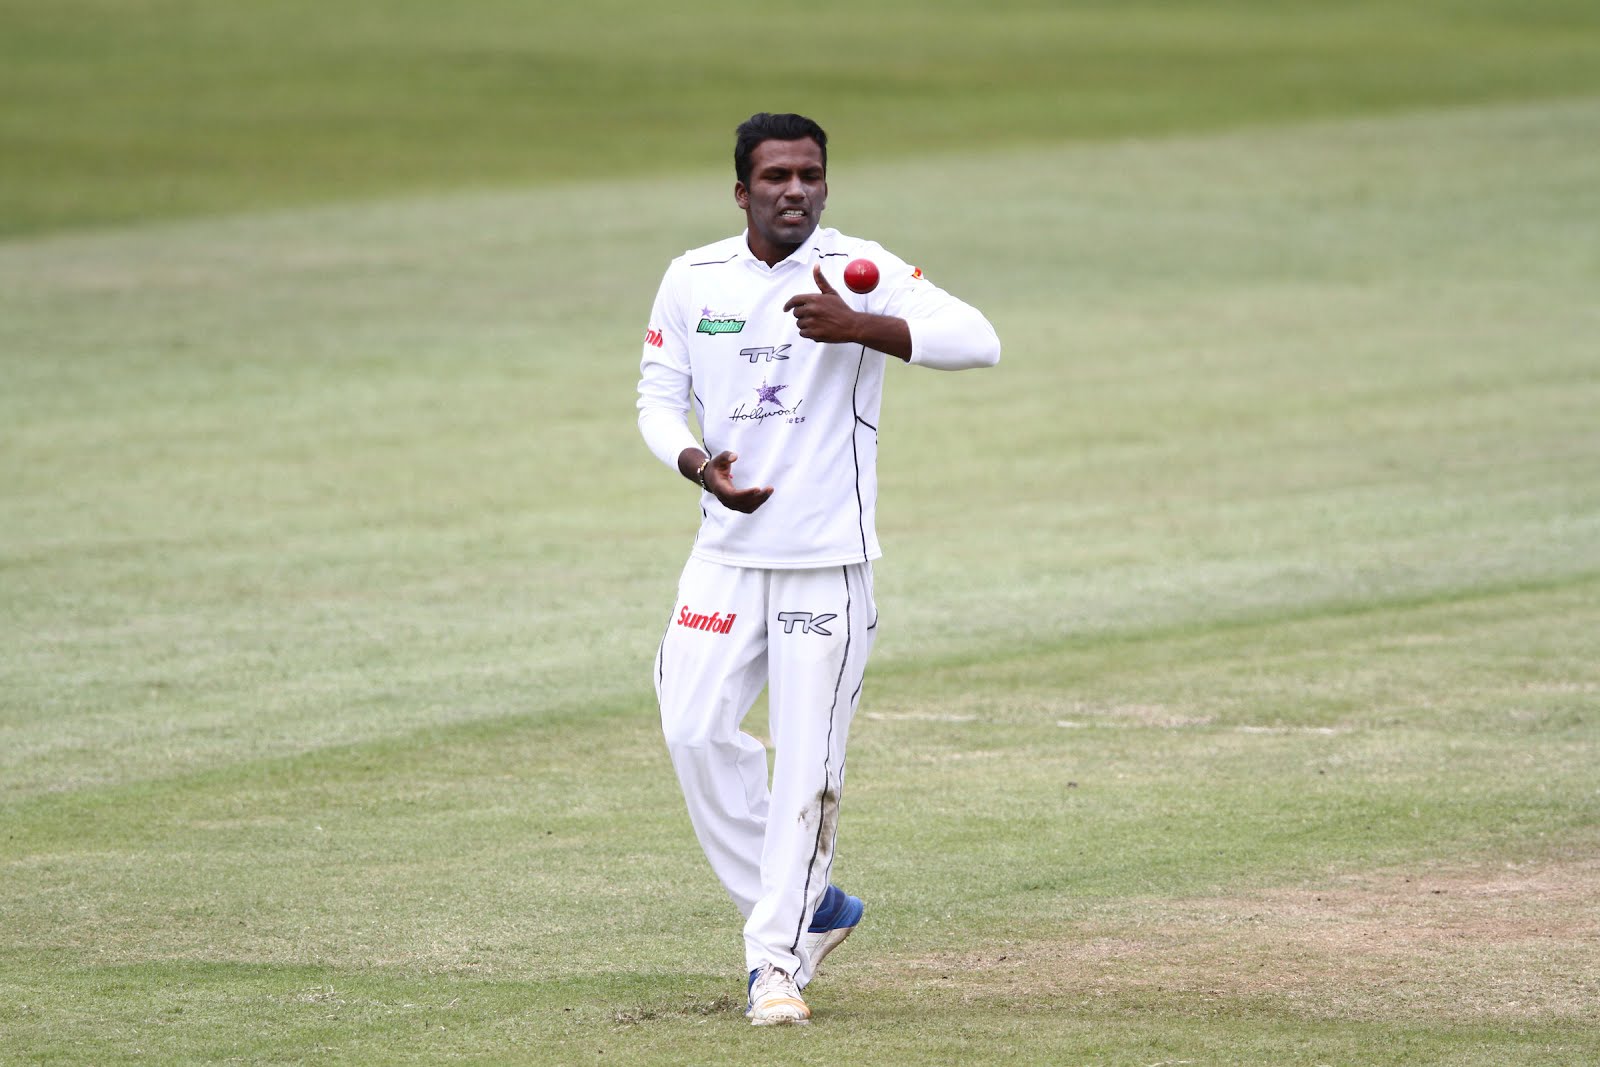 Hollywoodbets Dolphins all-rounder Senuran Muthusamy